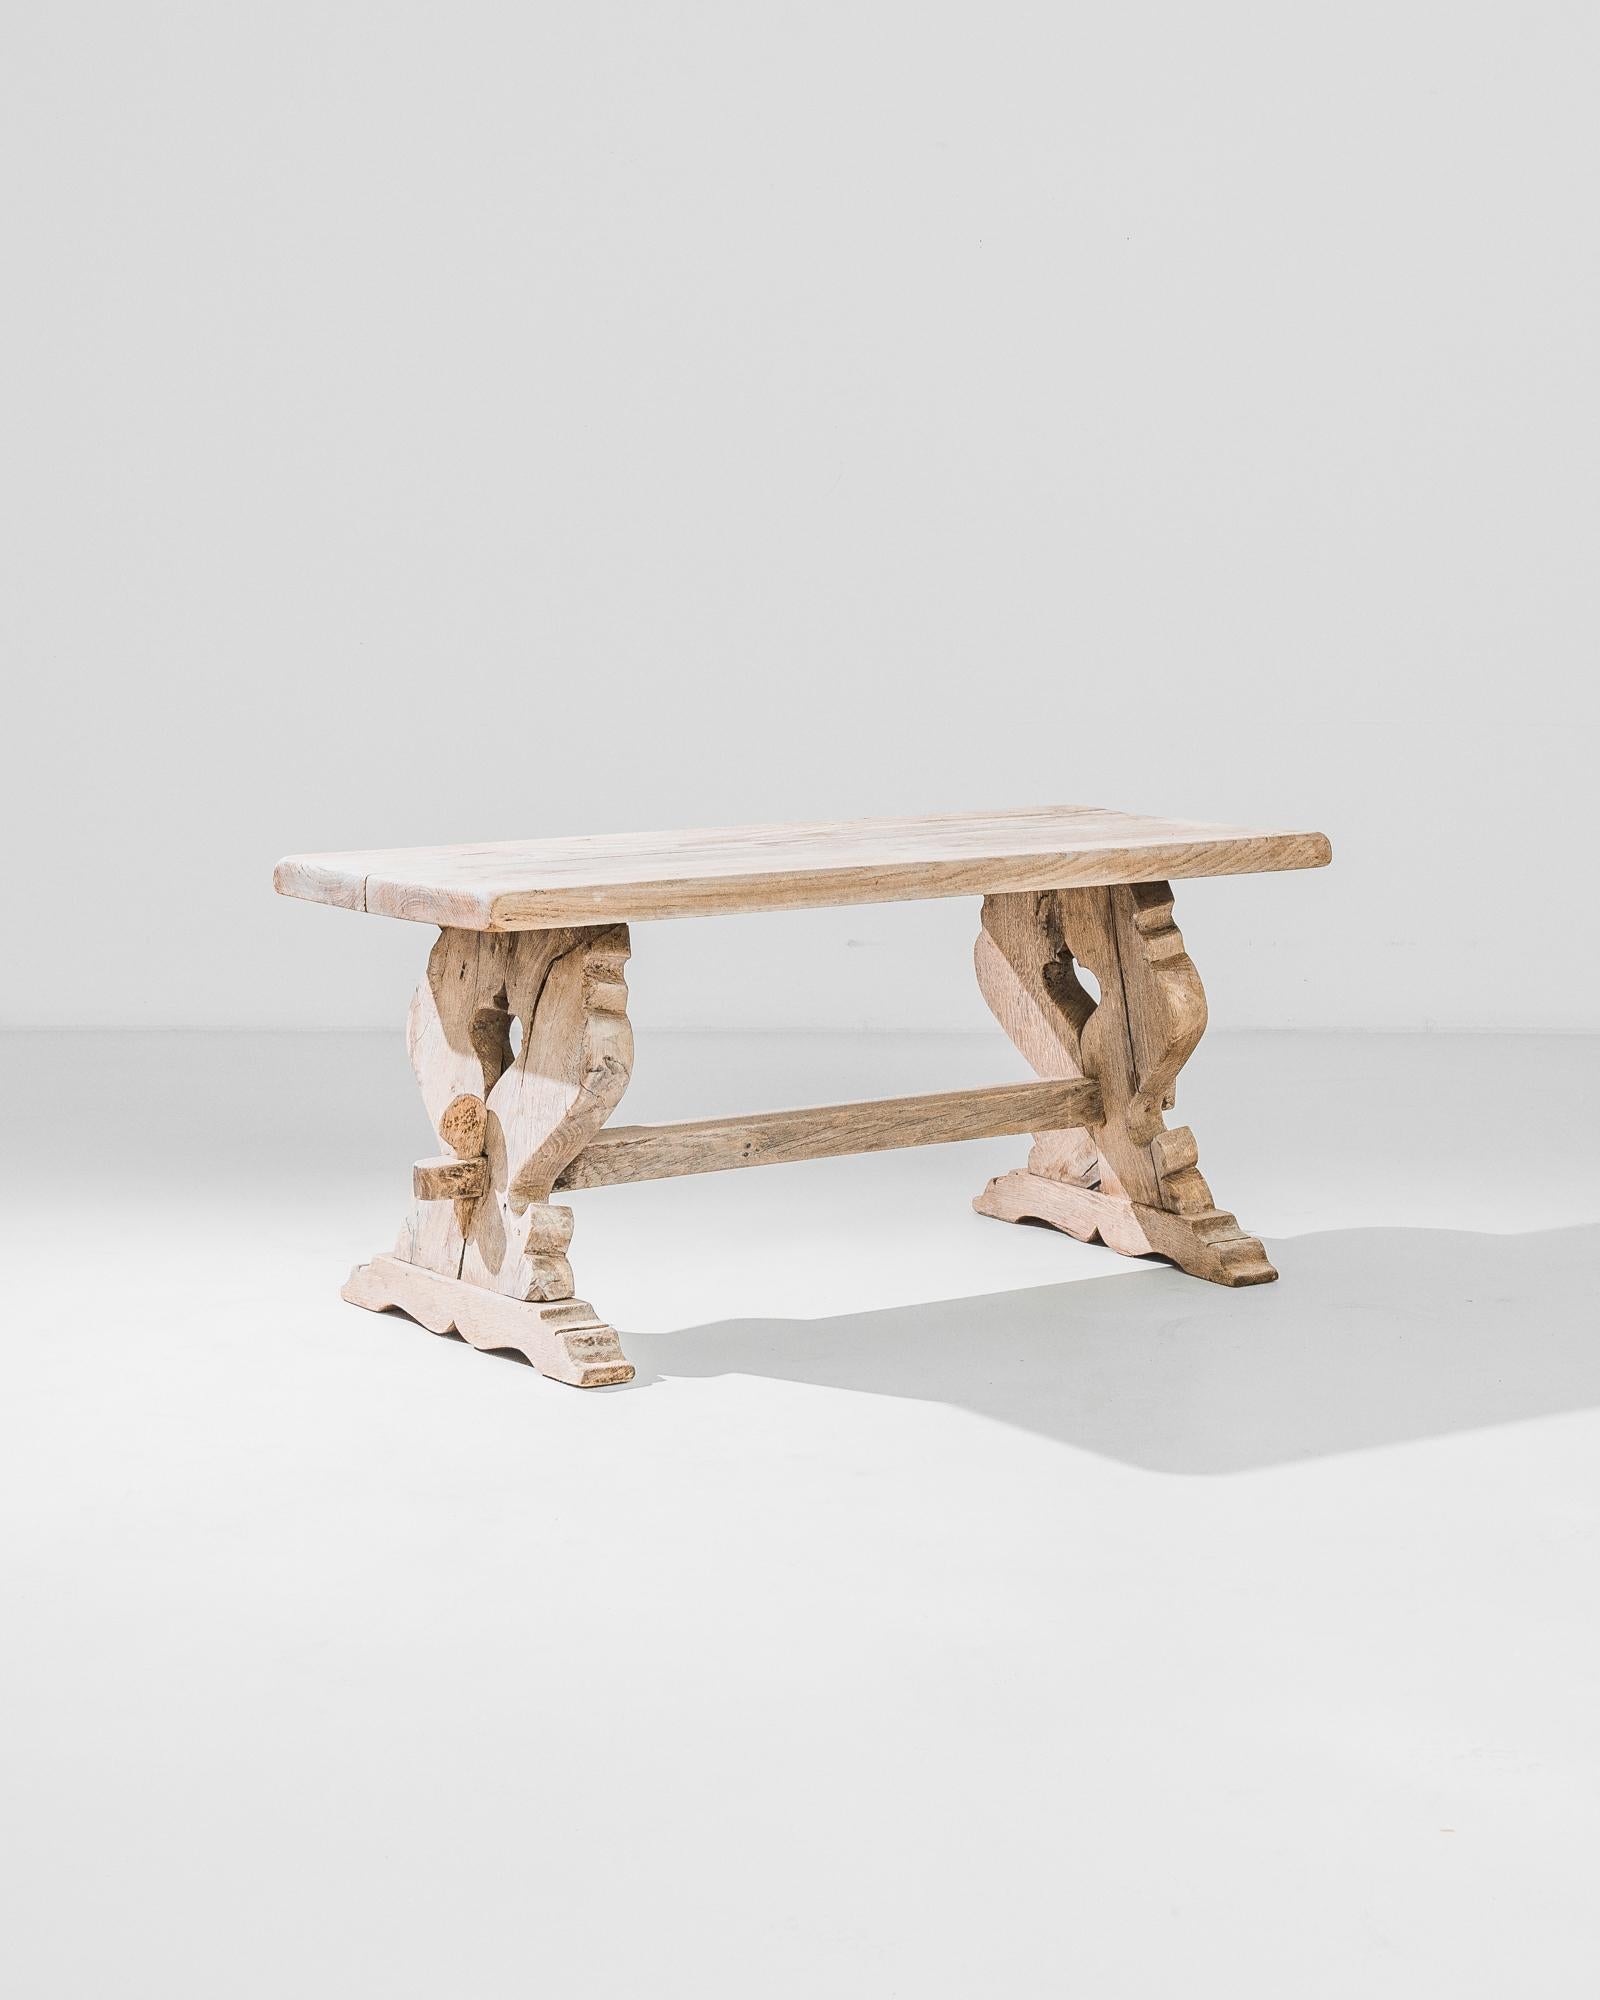 A bleached oak coffee table from France, produced circa 1960. Two gently angled, heart shaped legs connected by a simple stretcher rendered in a bright oak, make for a charming coffee table. A modern table with significant French country style